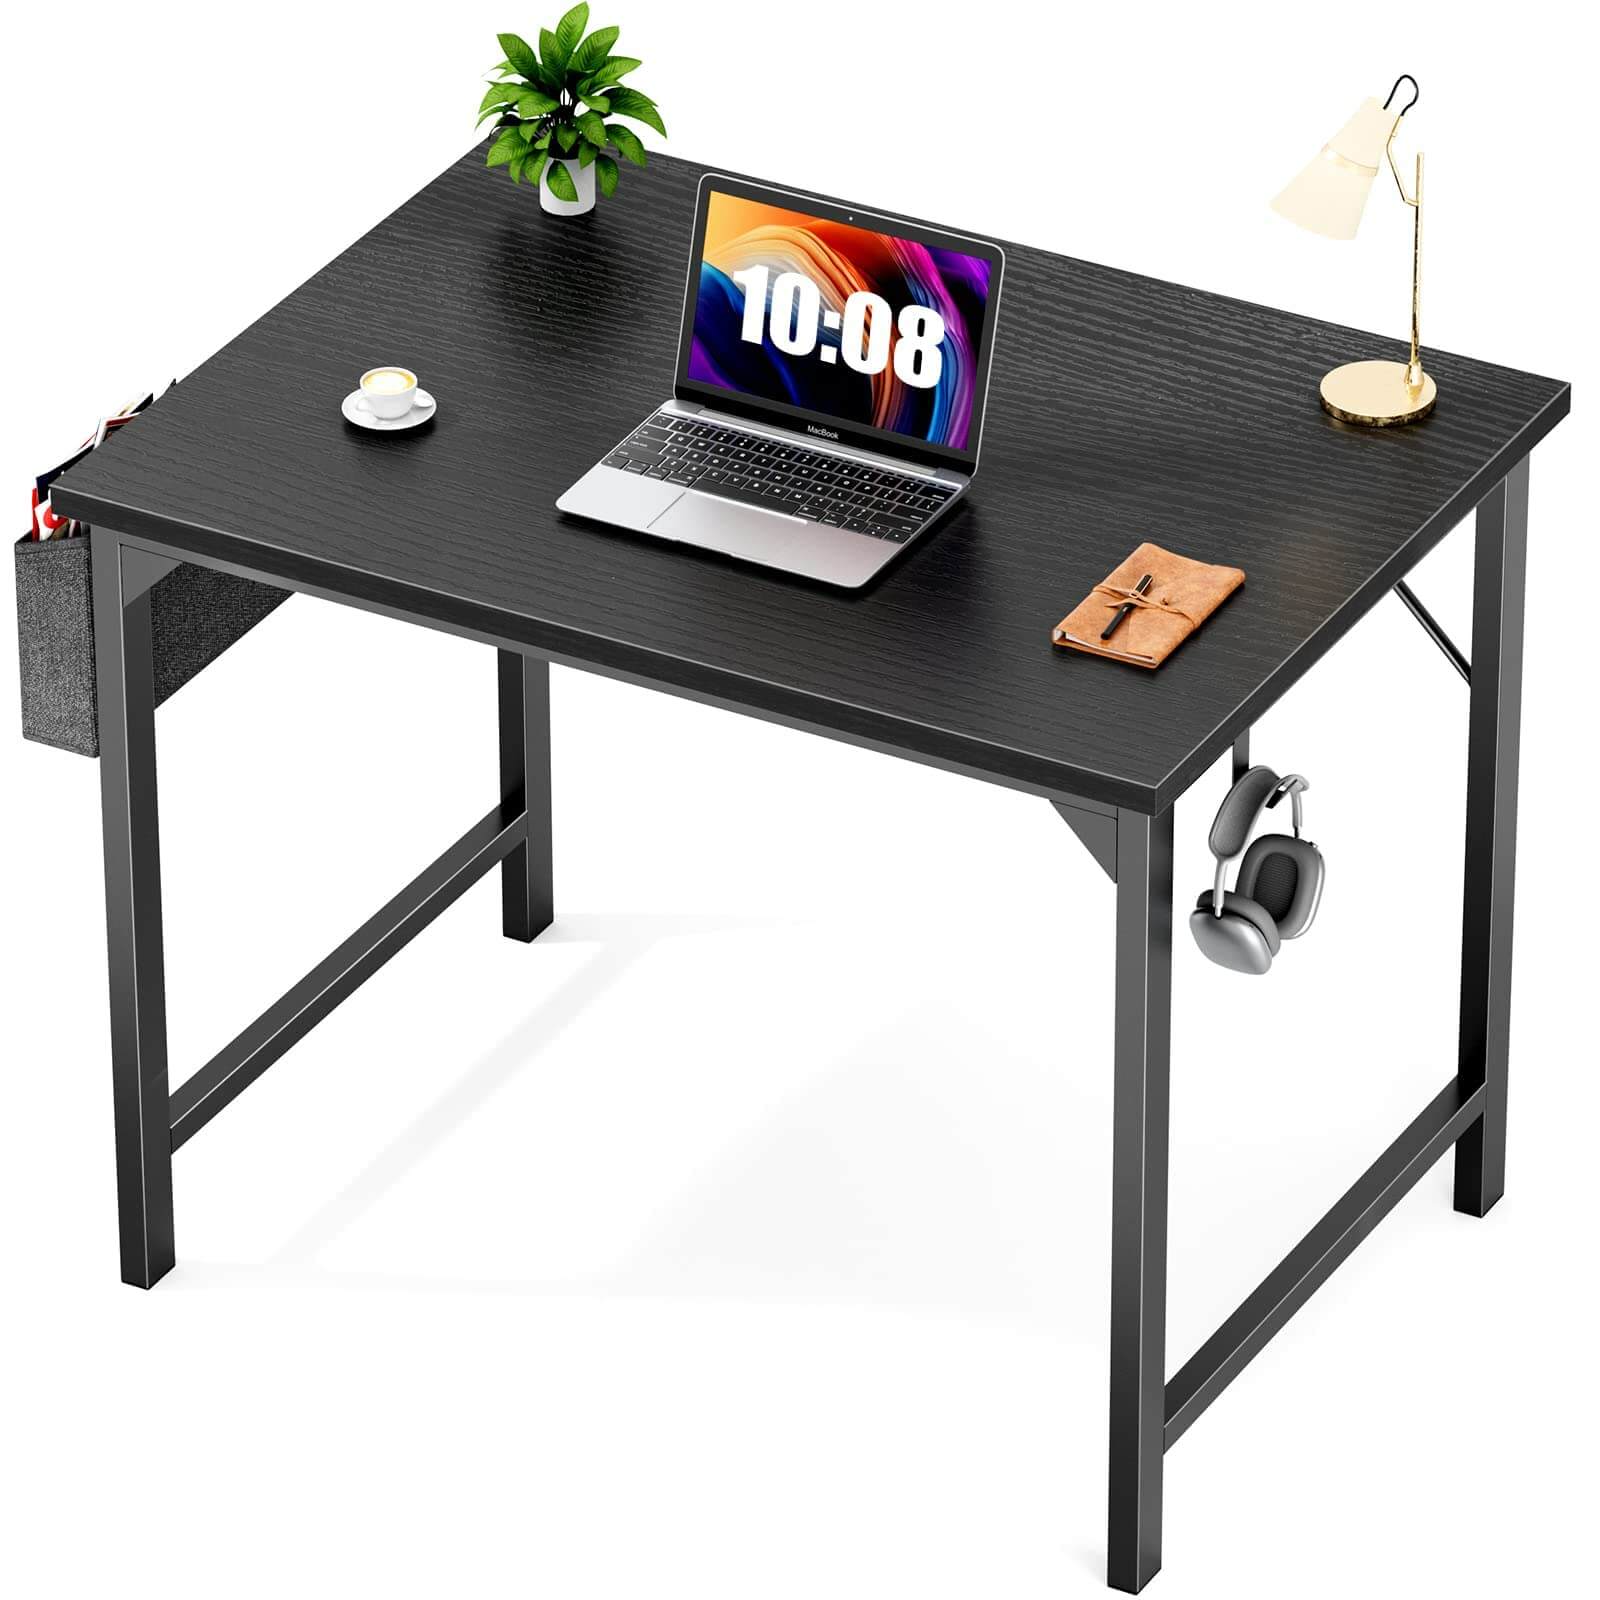 Cubiker Computer Desk 47 inch Home Office Writing Study Desk, Modern Simple  Style Laptop Table with Storage Bag, Black